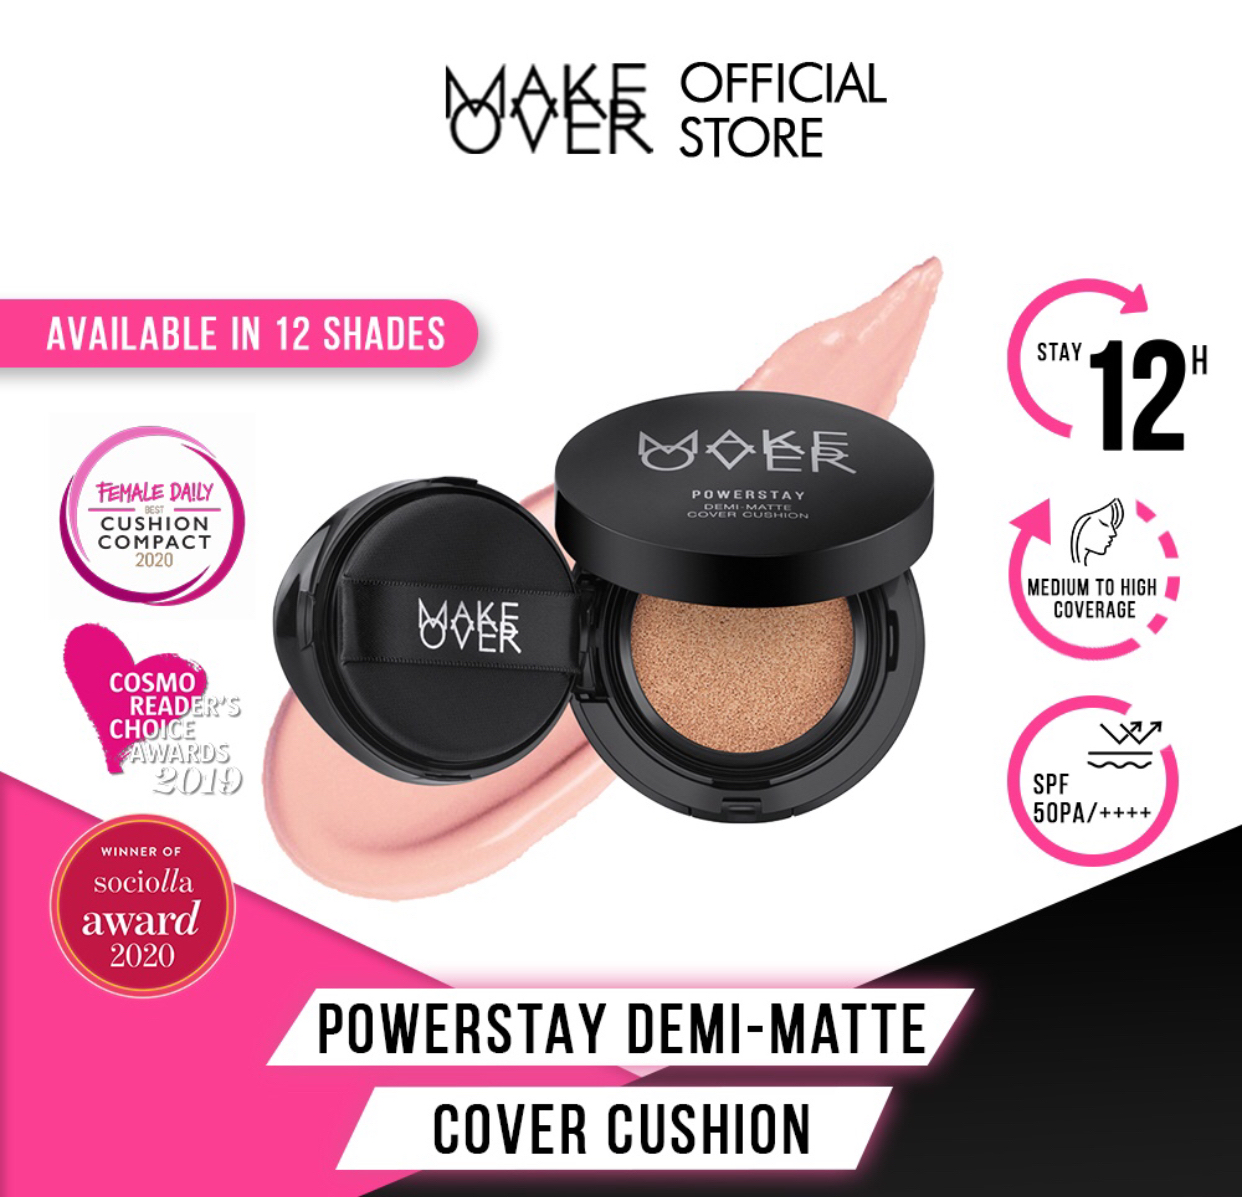 Make Over powerstay Demi-Matte Cover cushion